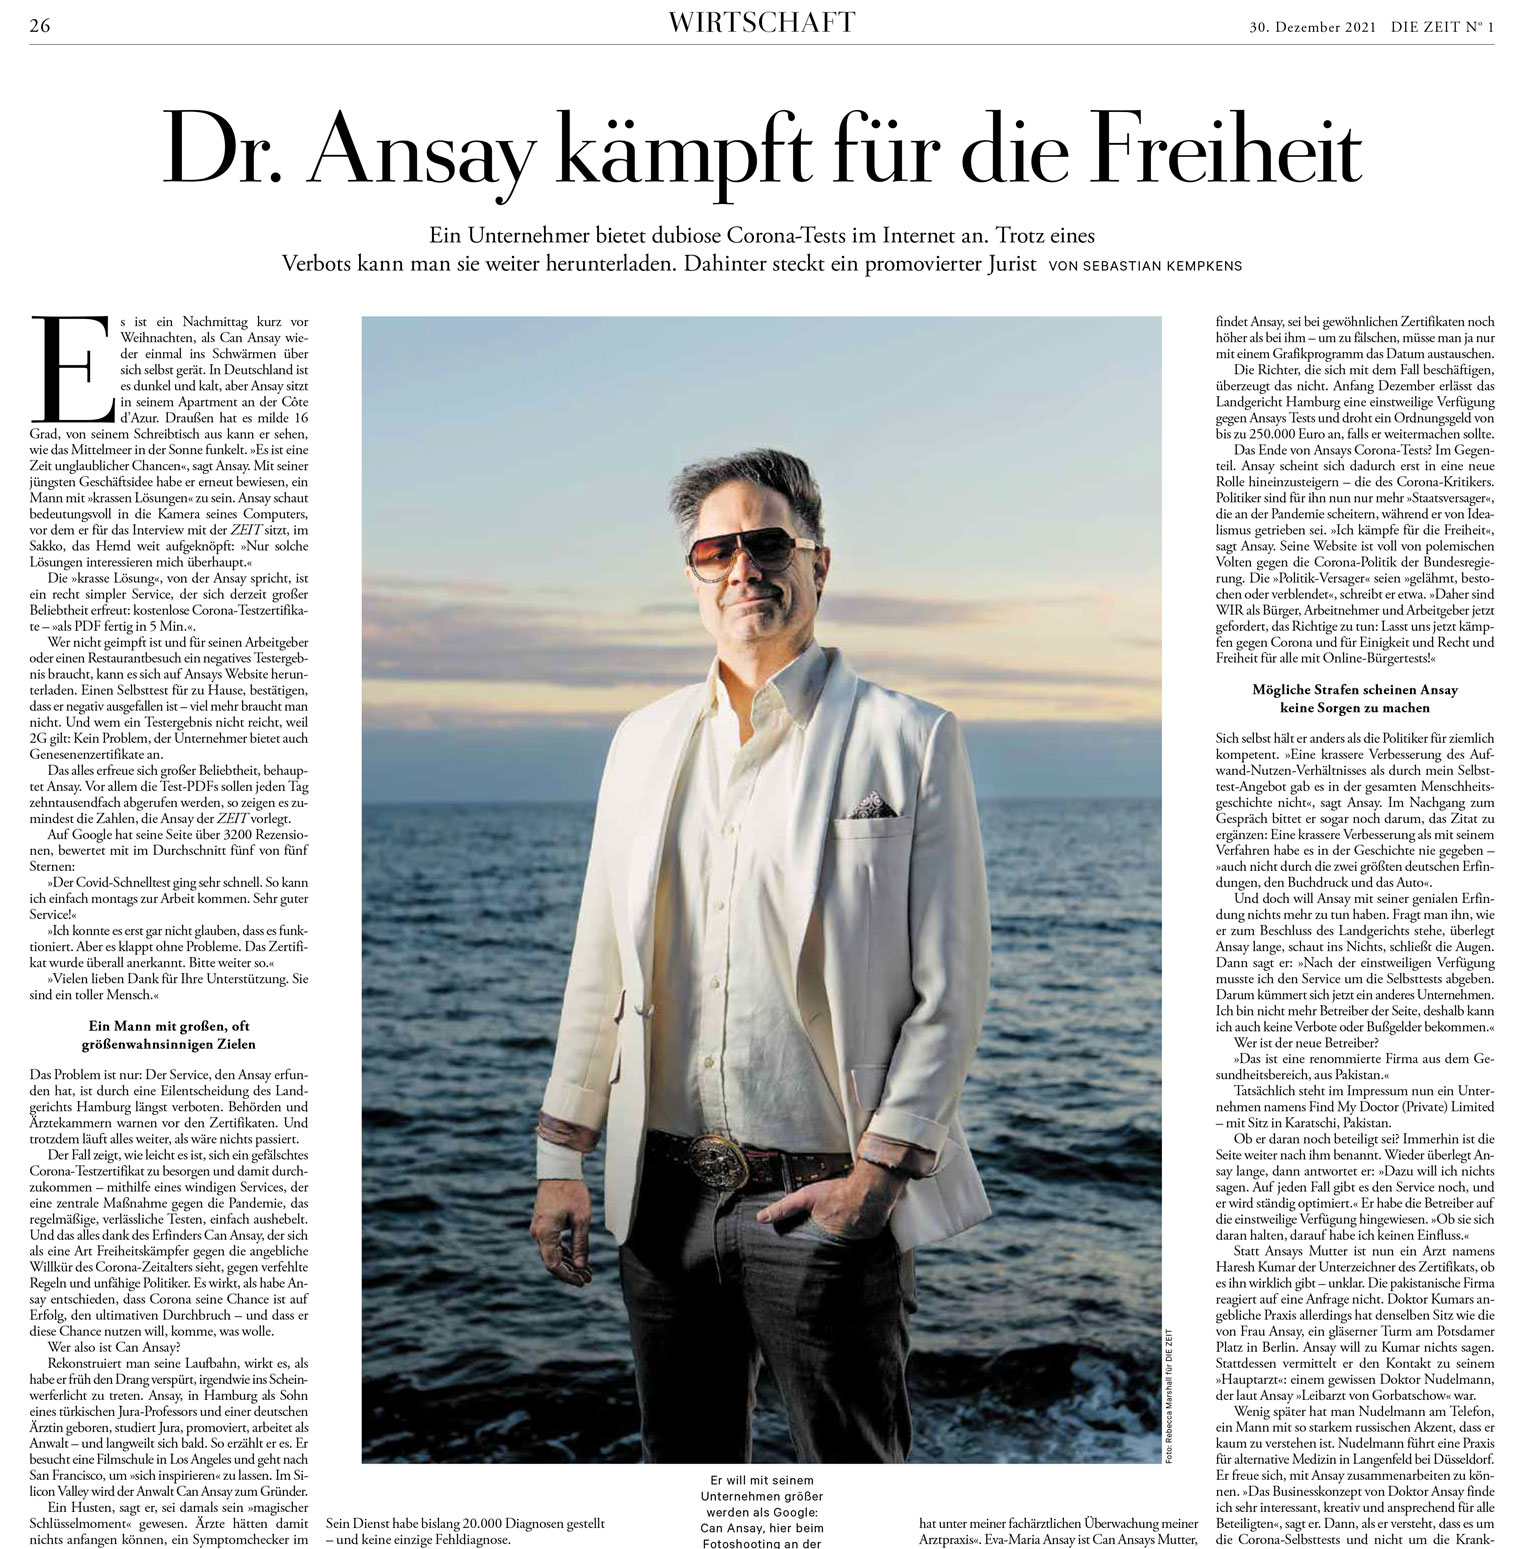 Page from German newspaper Die Zeit showing portrait of a man in a white linen jacket standing in front of the ocean